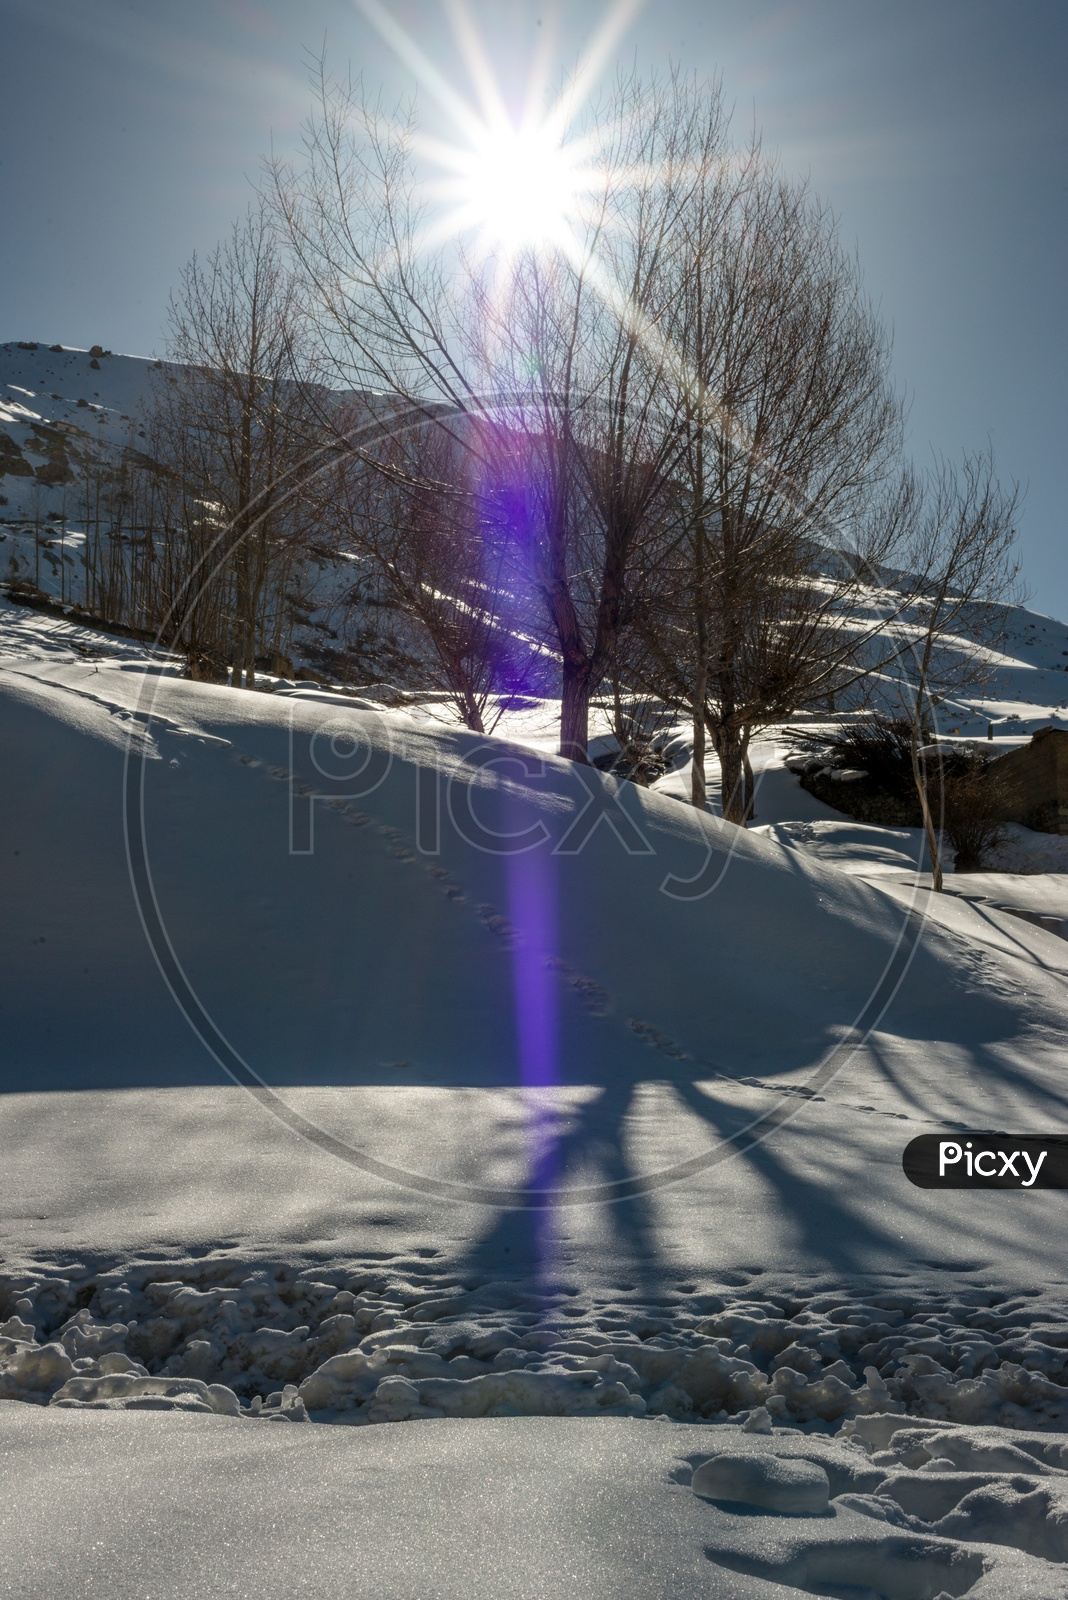 Sun Starbust over Dry Trees in Snow in Himalayas